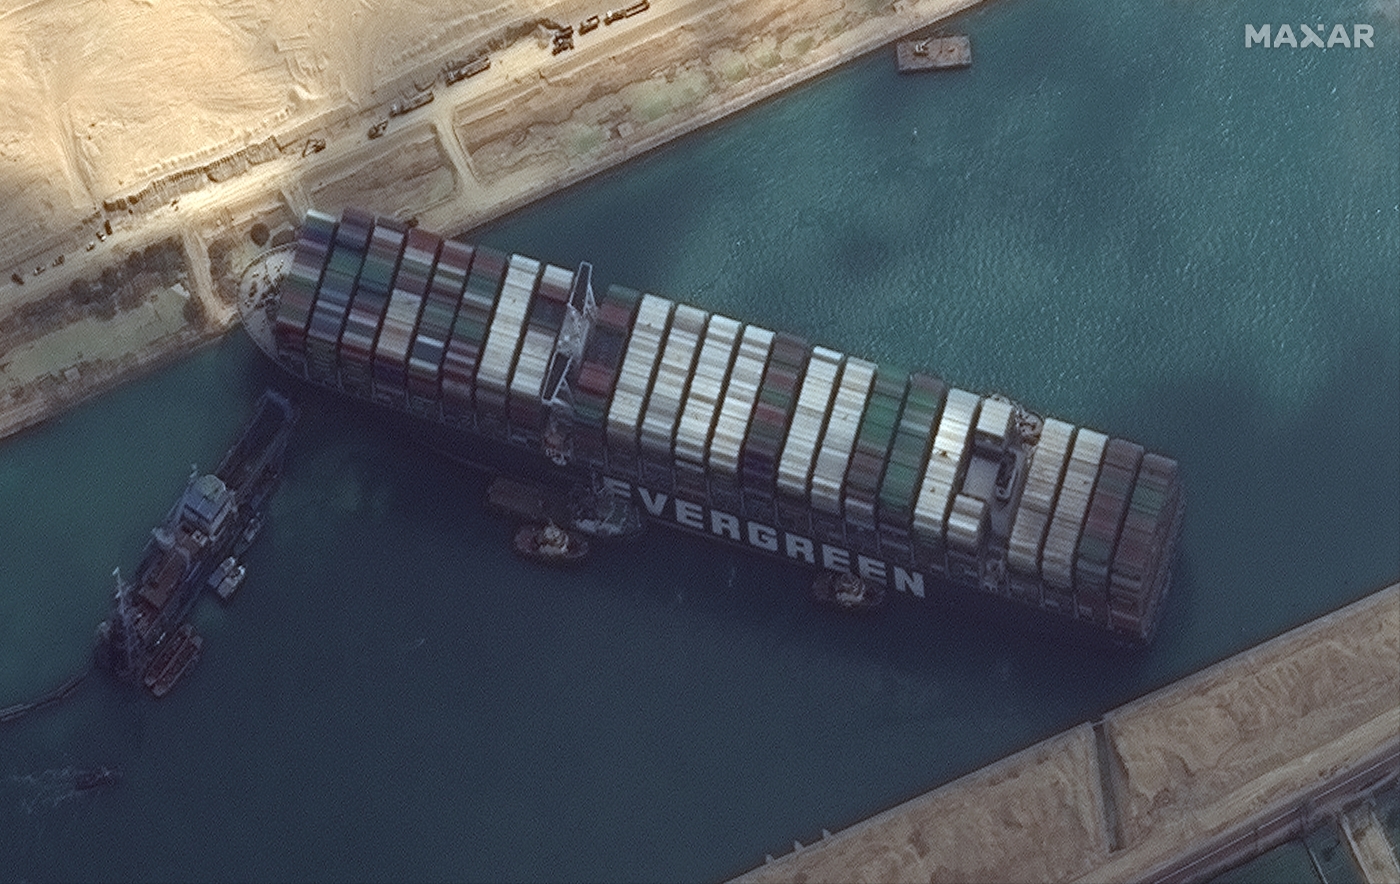 Suez Canal: Dutch firm hopes to free ship by early next week | Middle East Eye